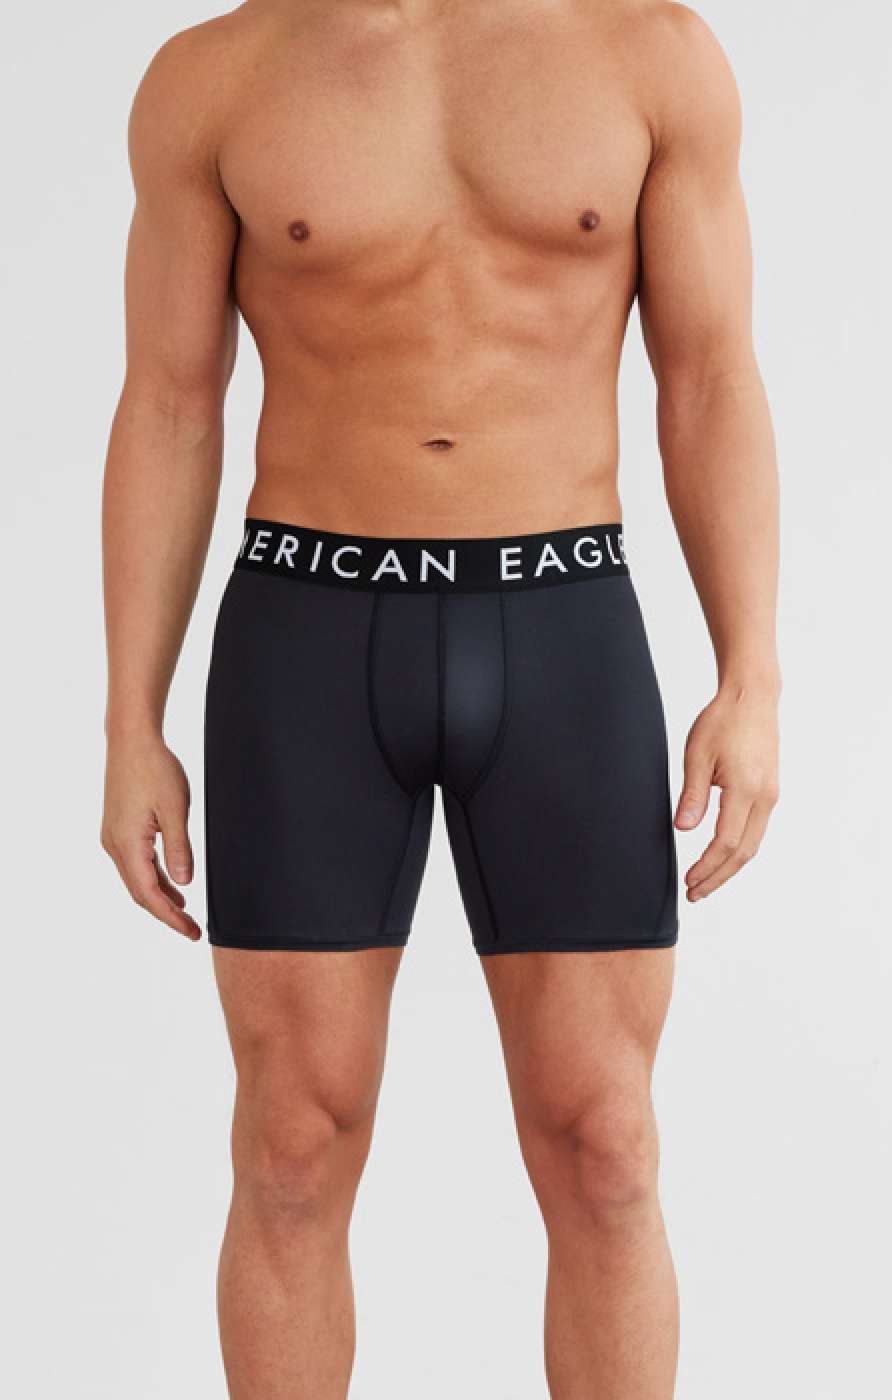 5 Lessons About personalized underwear You Can Learn From